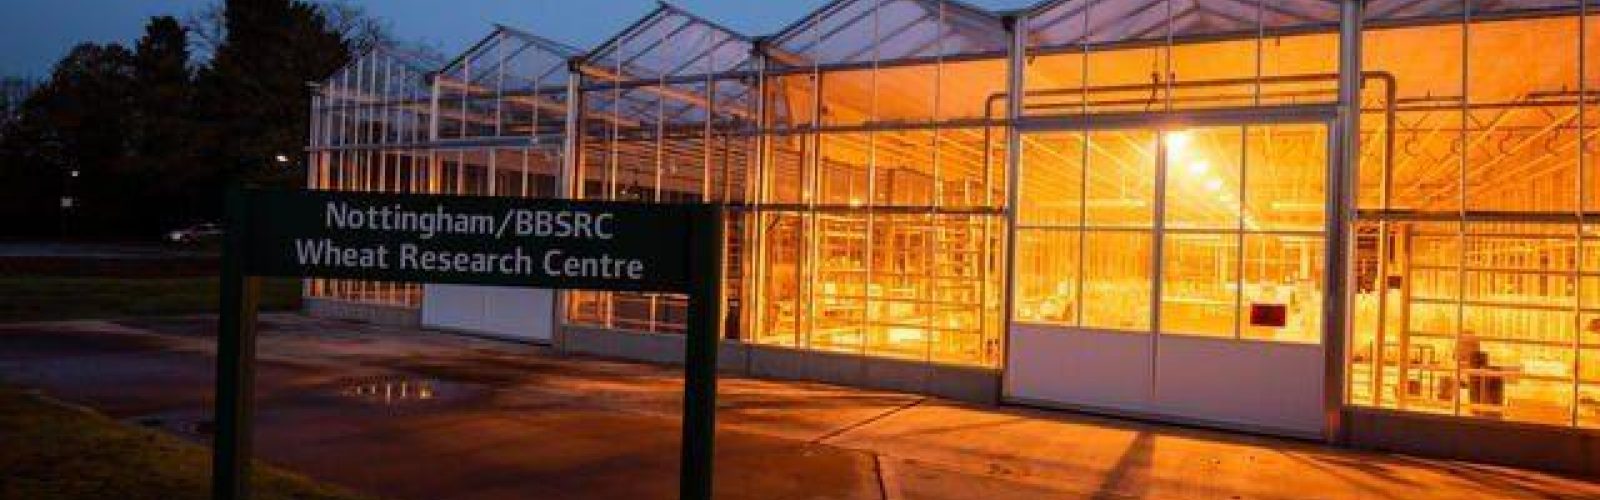 BBSRC Wheat Research Centre Glasshouses 3